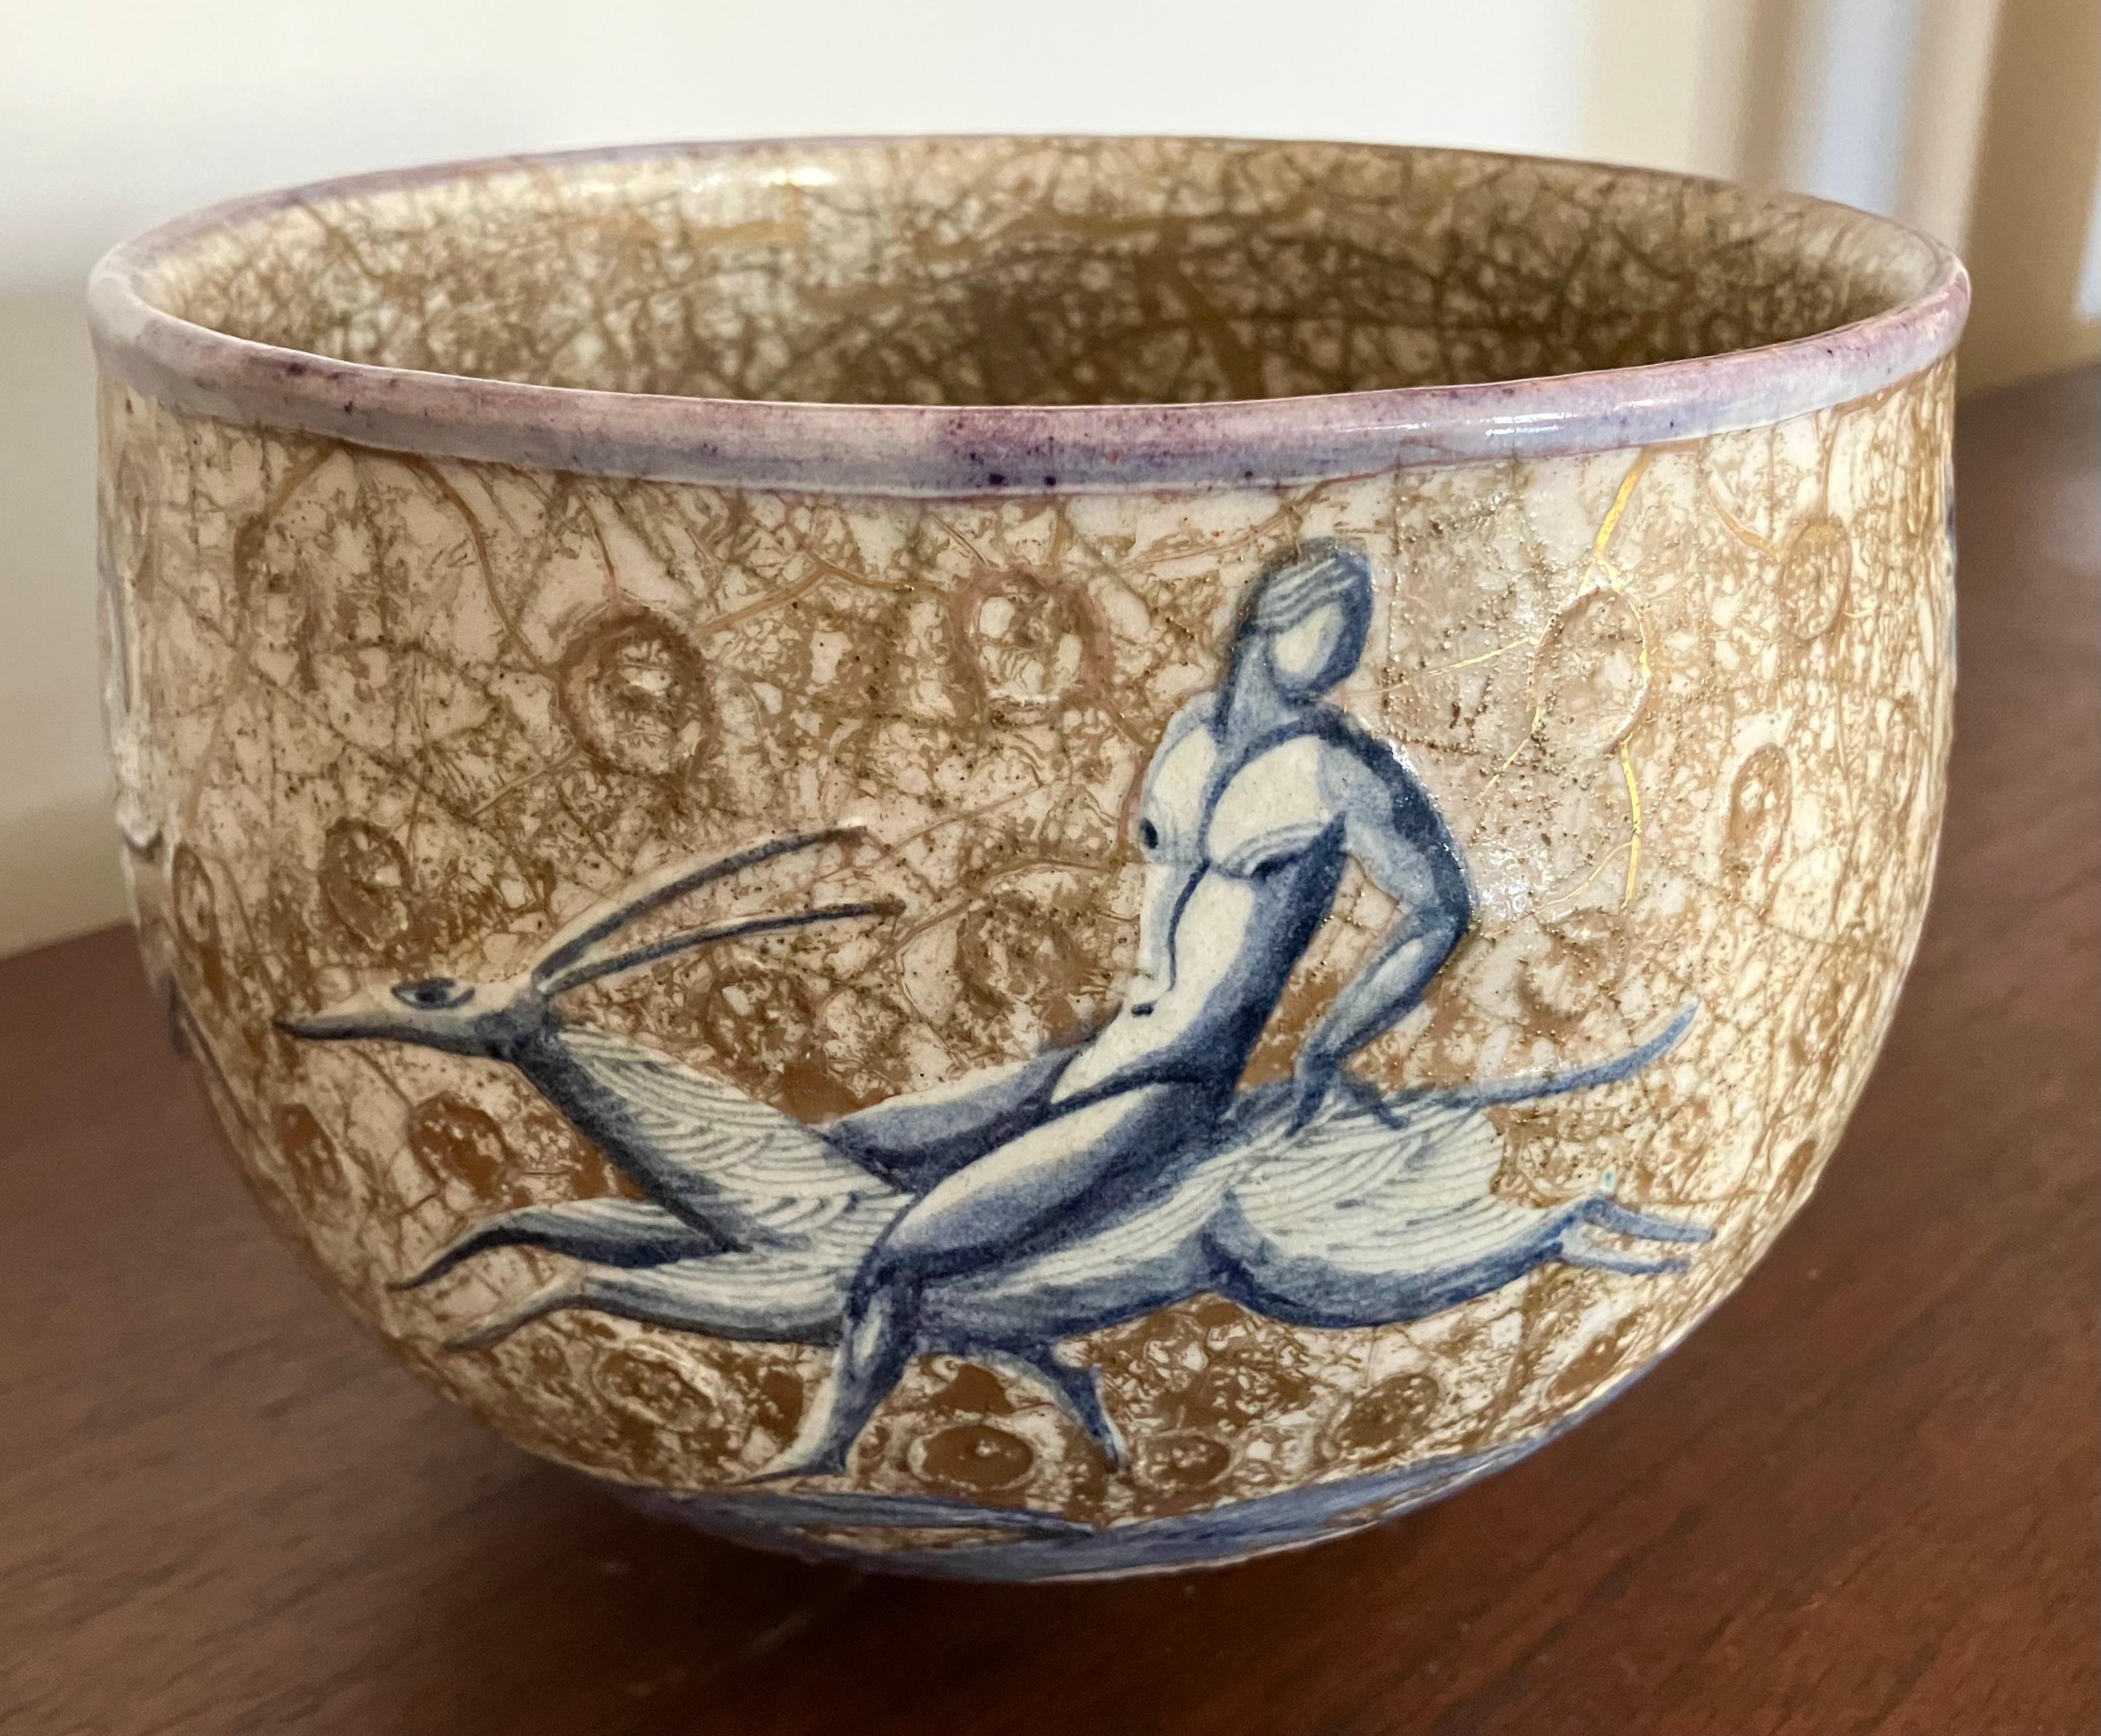 Elegant and atmospheric design by legendary French Art Deco ceramicist Jean Mayadon. Blue and white nude male and female figures riding stylized gazelles encircle the bowl, on a mottled brown and gilt craquelure ground. A striking design